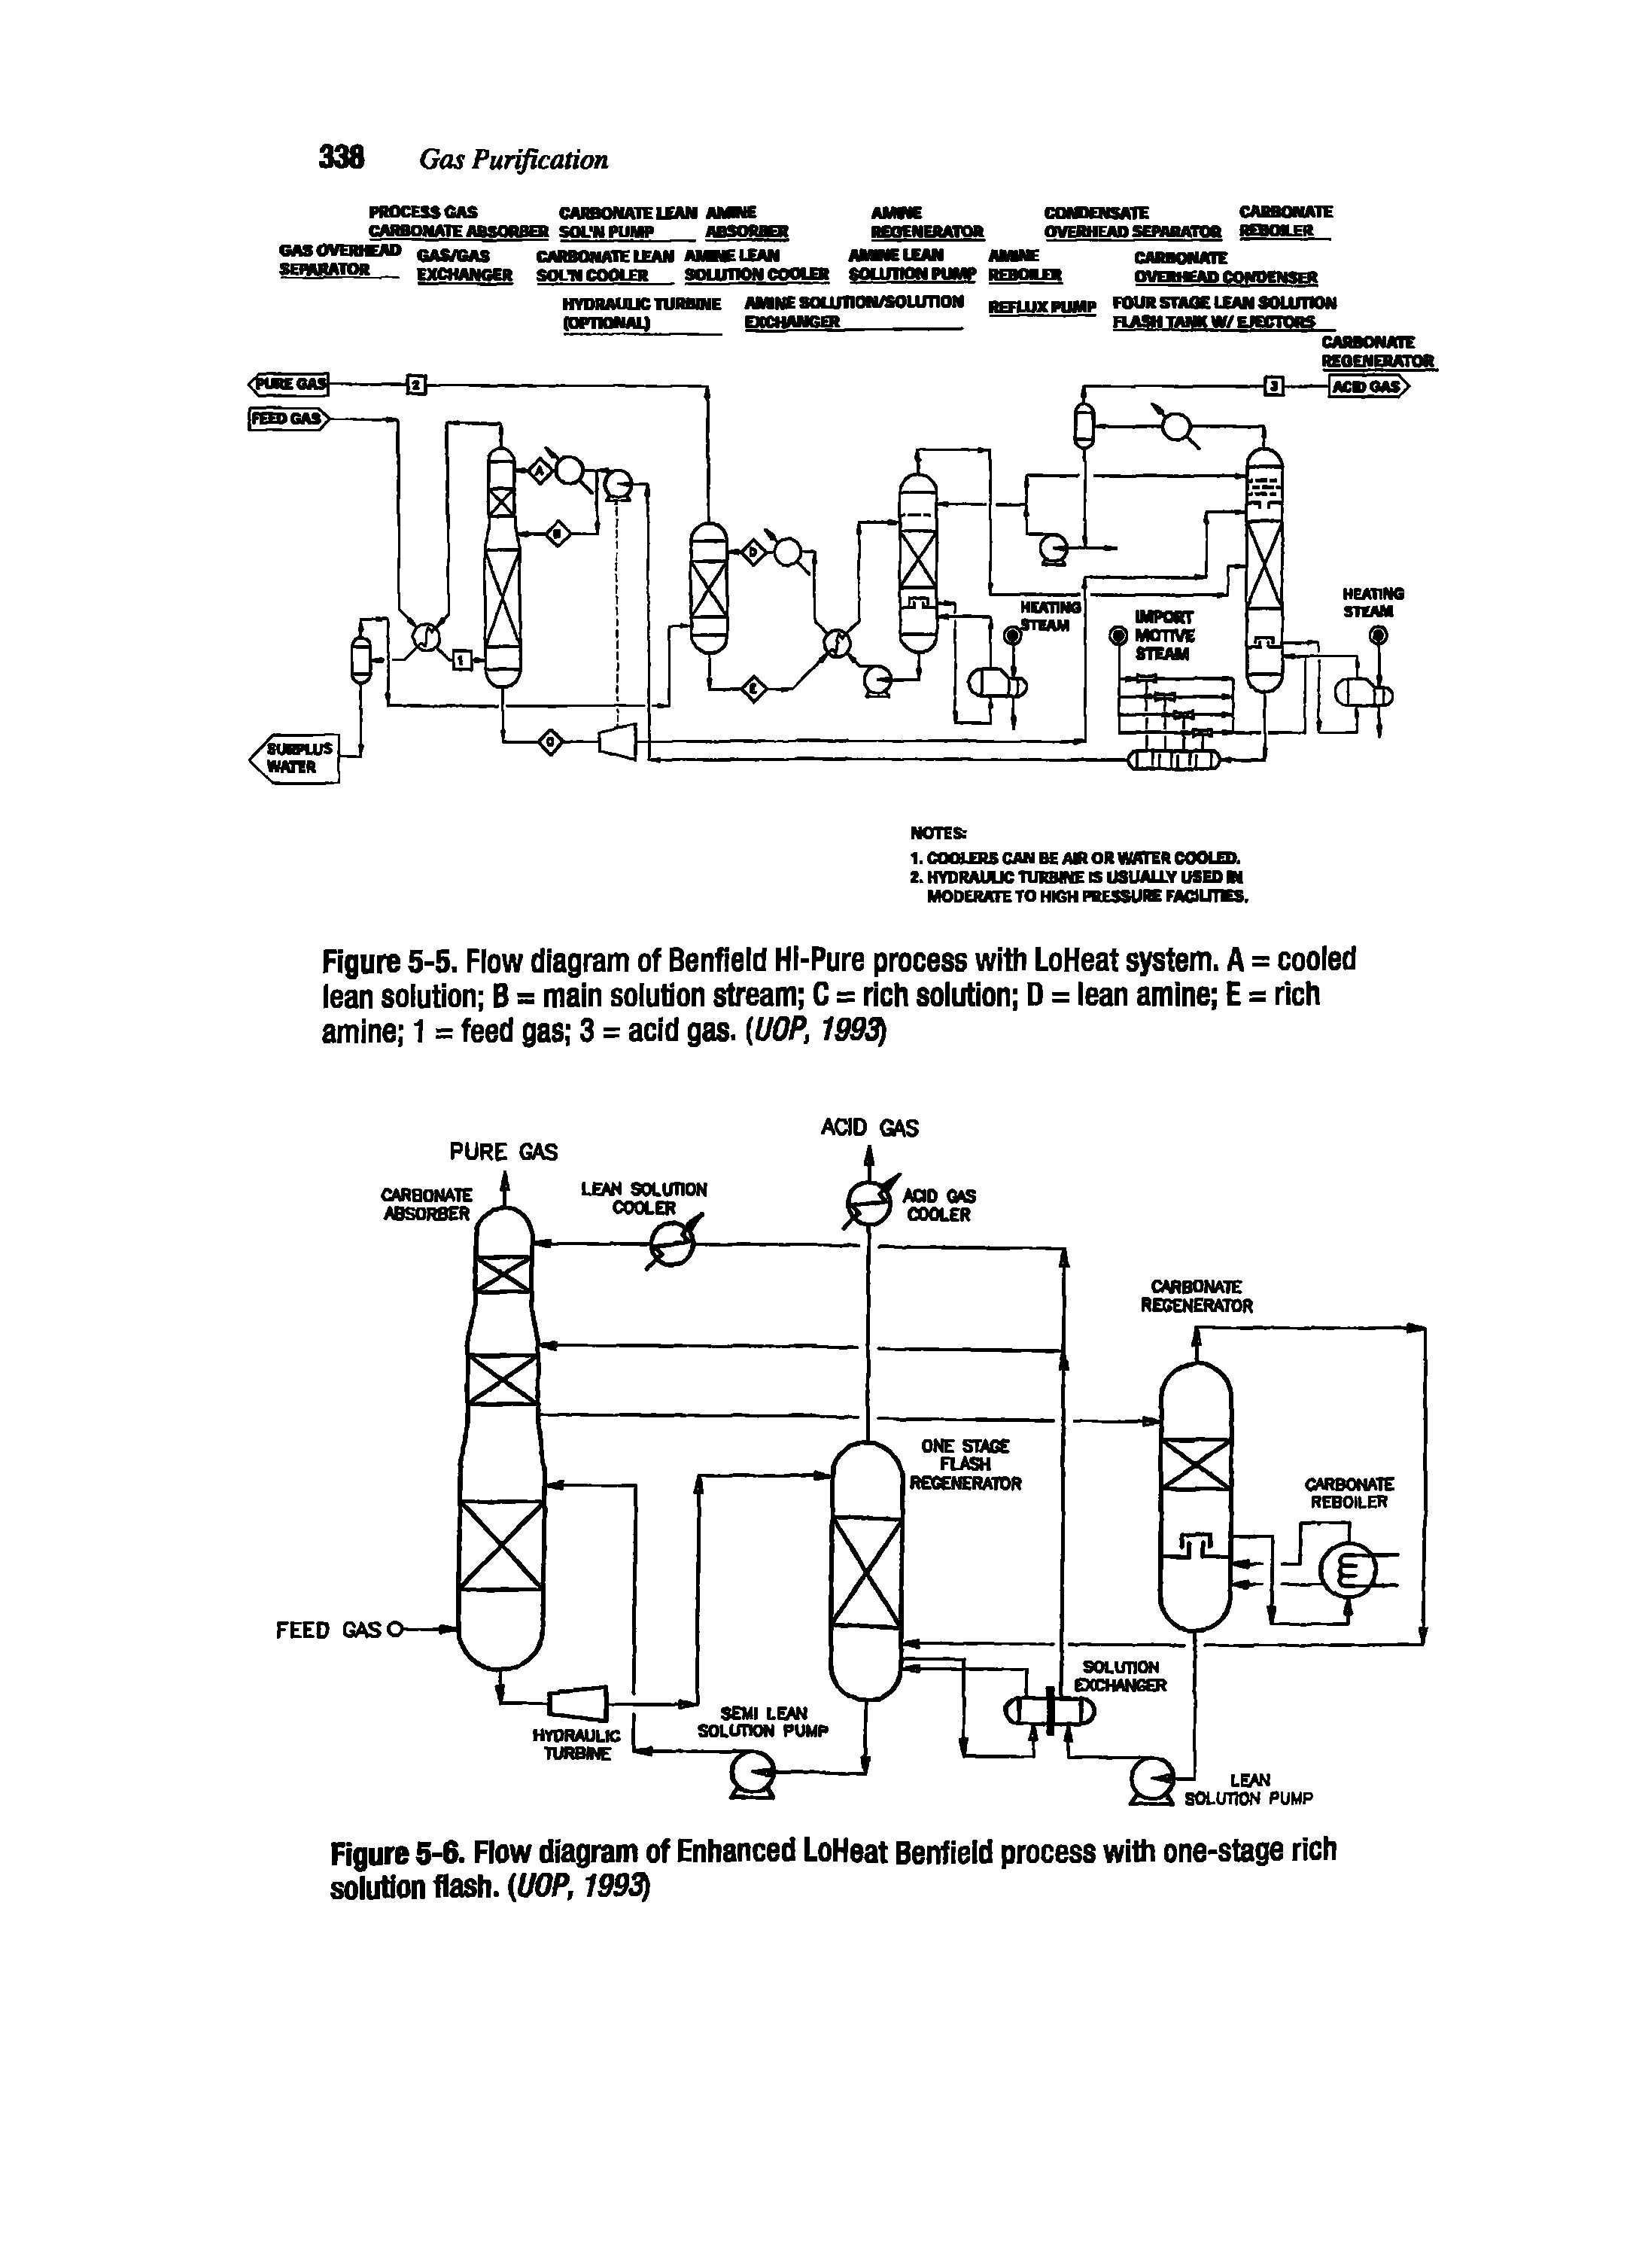 Figure 5-5. Flow diagram of Benfield Hi-Pure process with LoHeat system. A = cooled lean solution B = main solution stream C = rich solution D = lean amine E = rich amine 1 = feed gas 3 = acid gas. (UOP, 1993j...